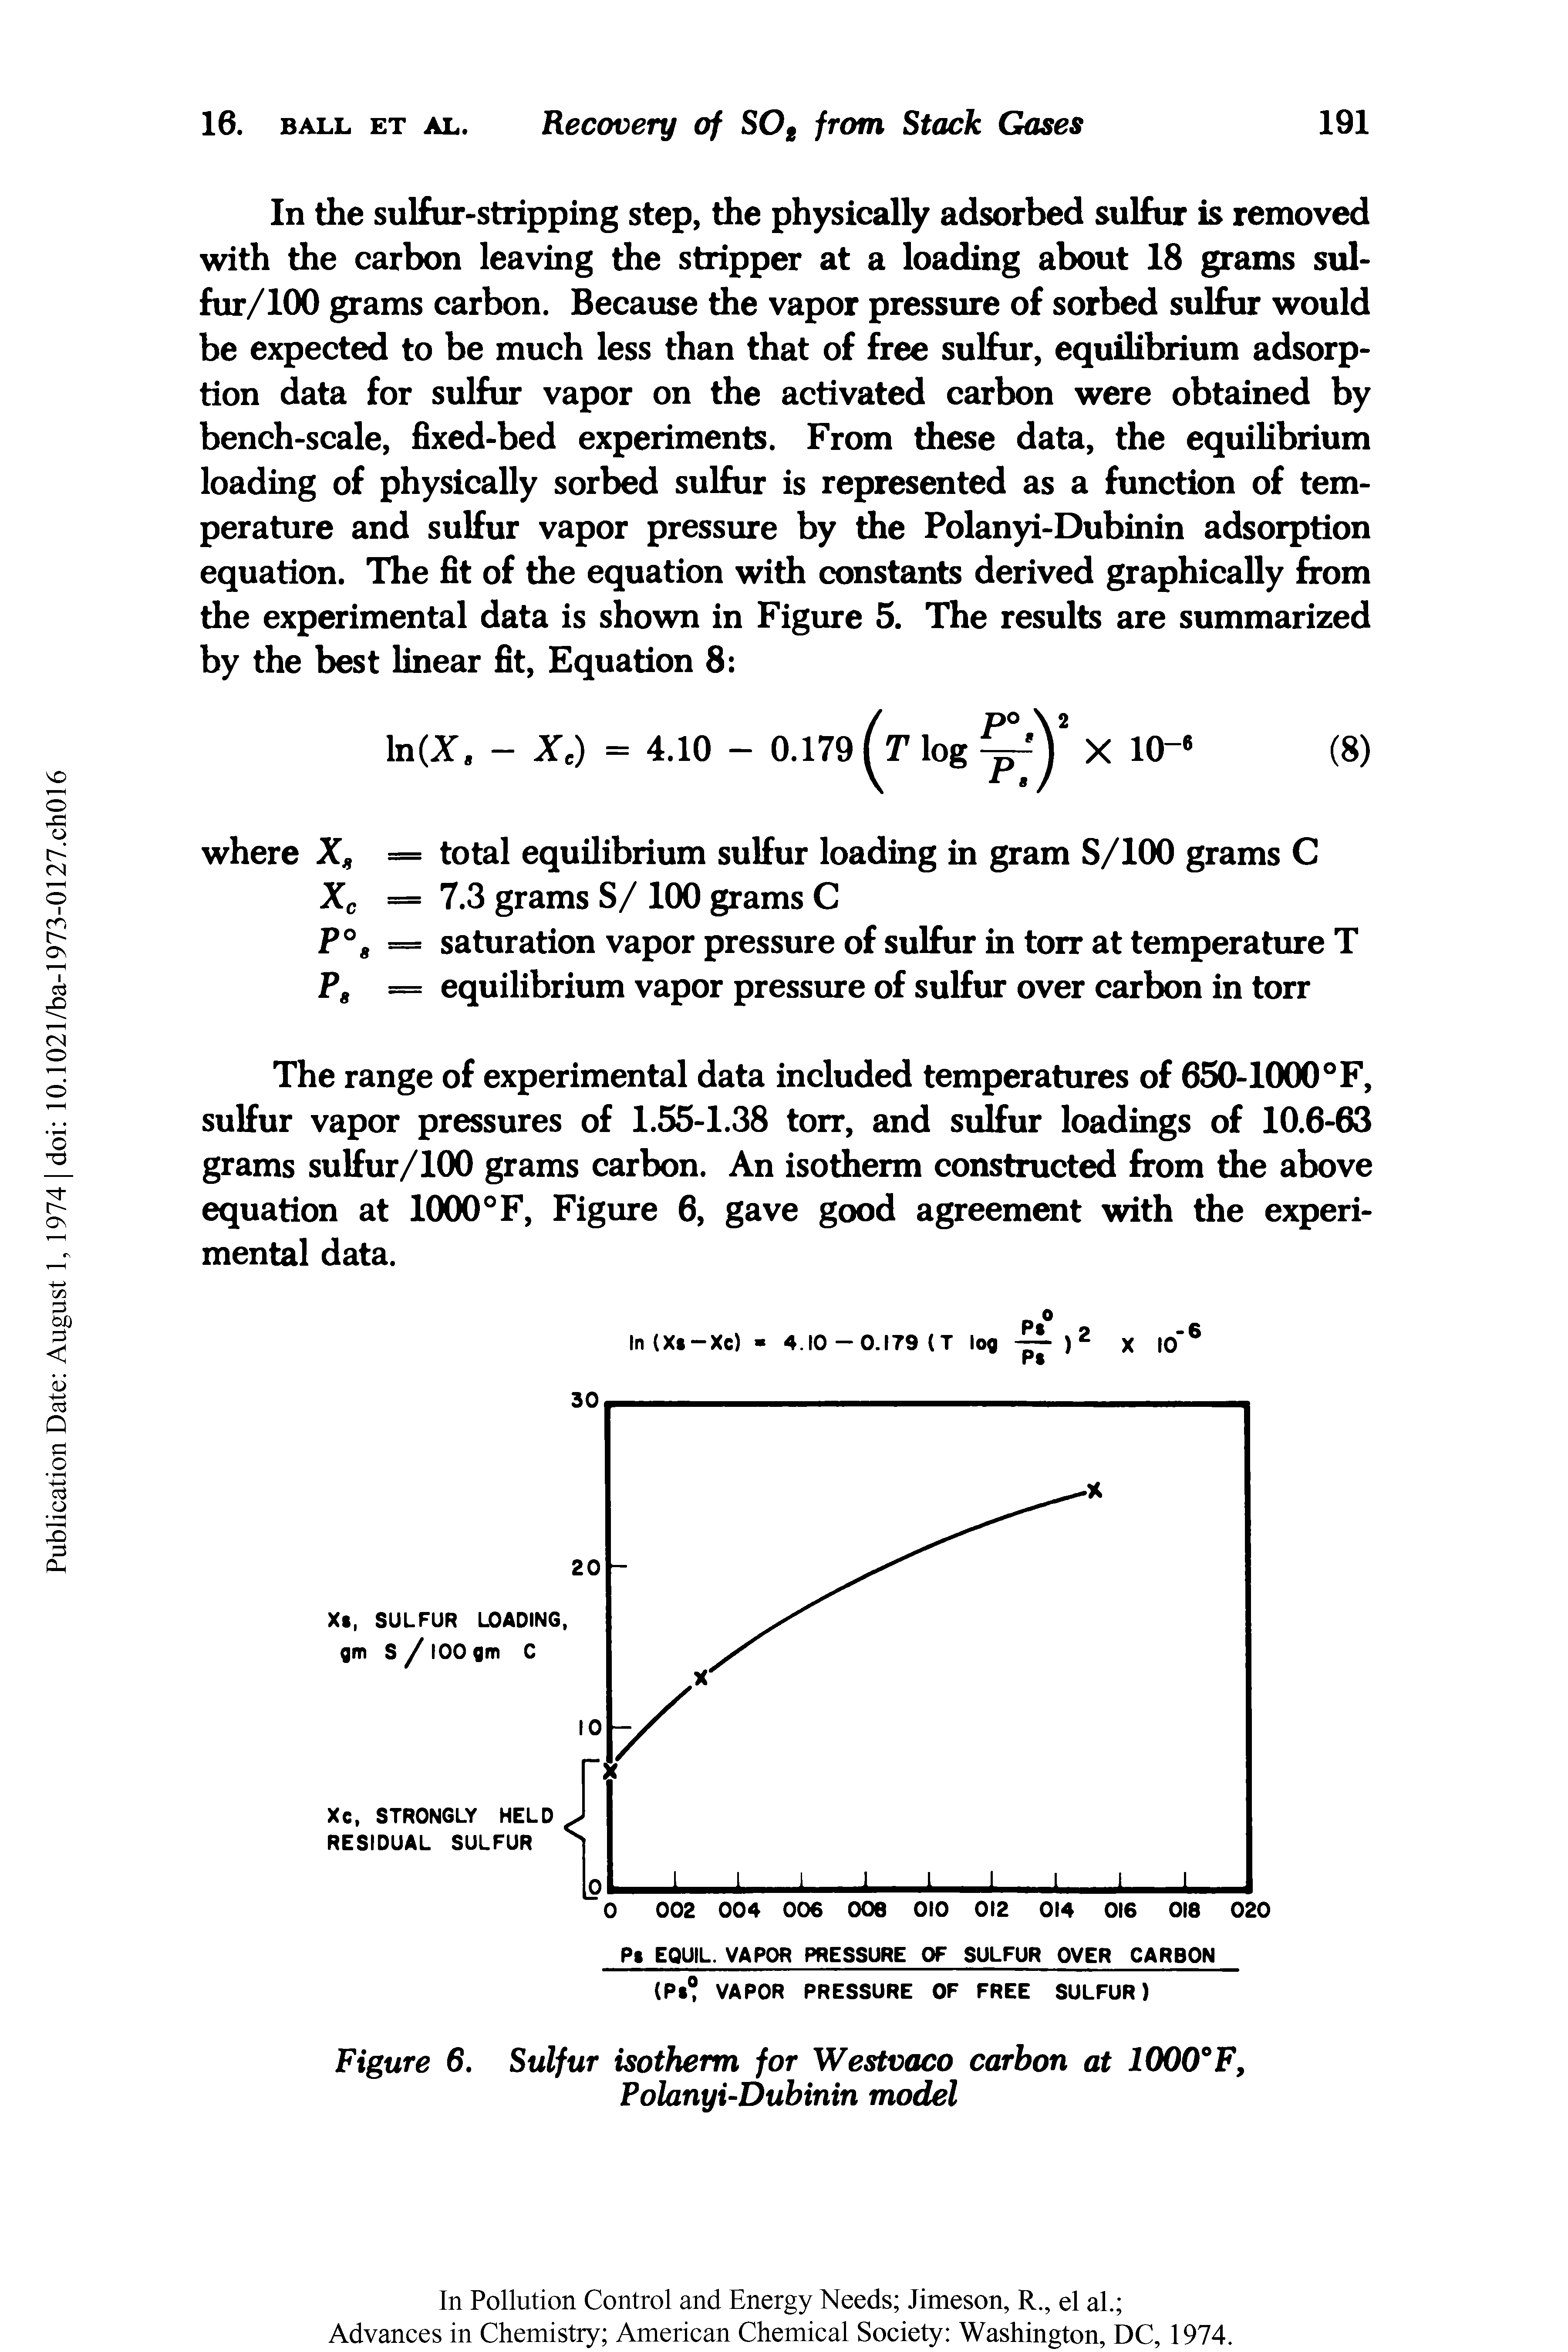 Figure 6. Sulfur isotherm for Westvaco carbon at J000 F, Polanyi-Dubinin model...